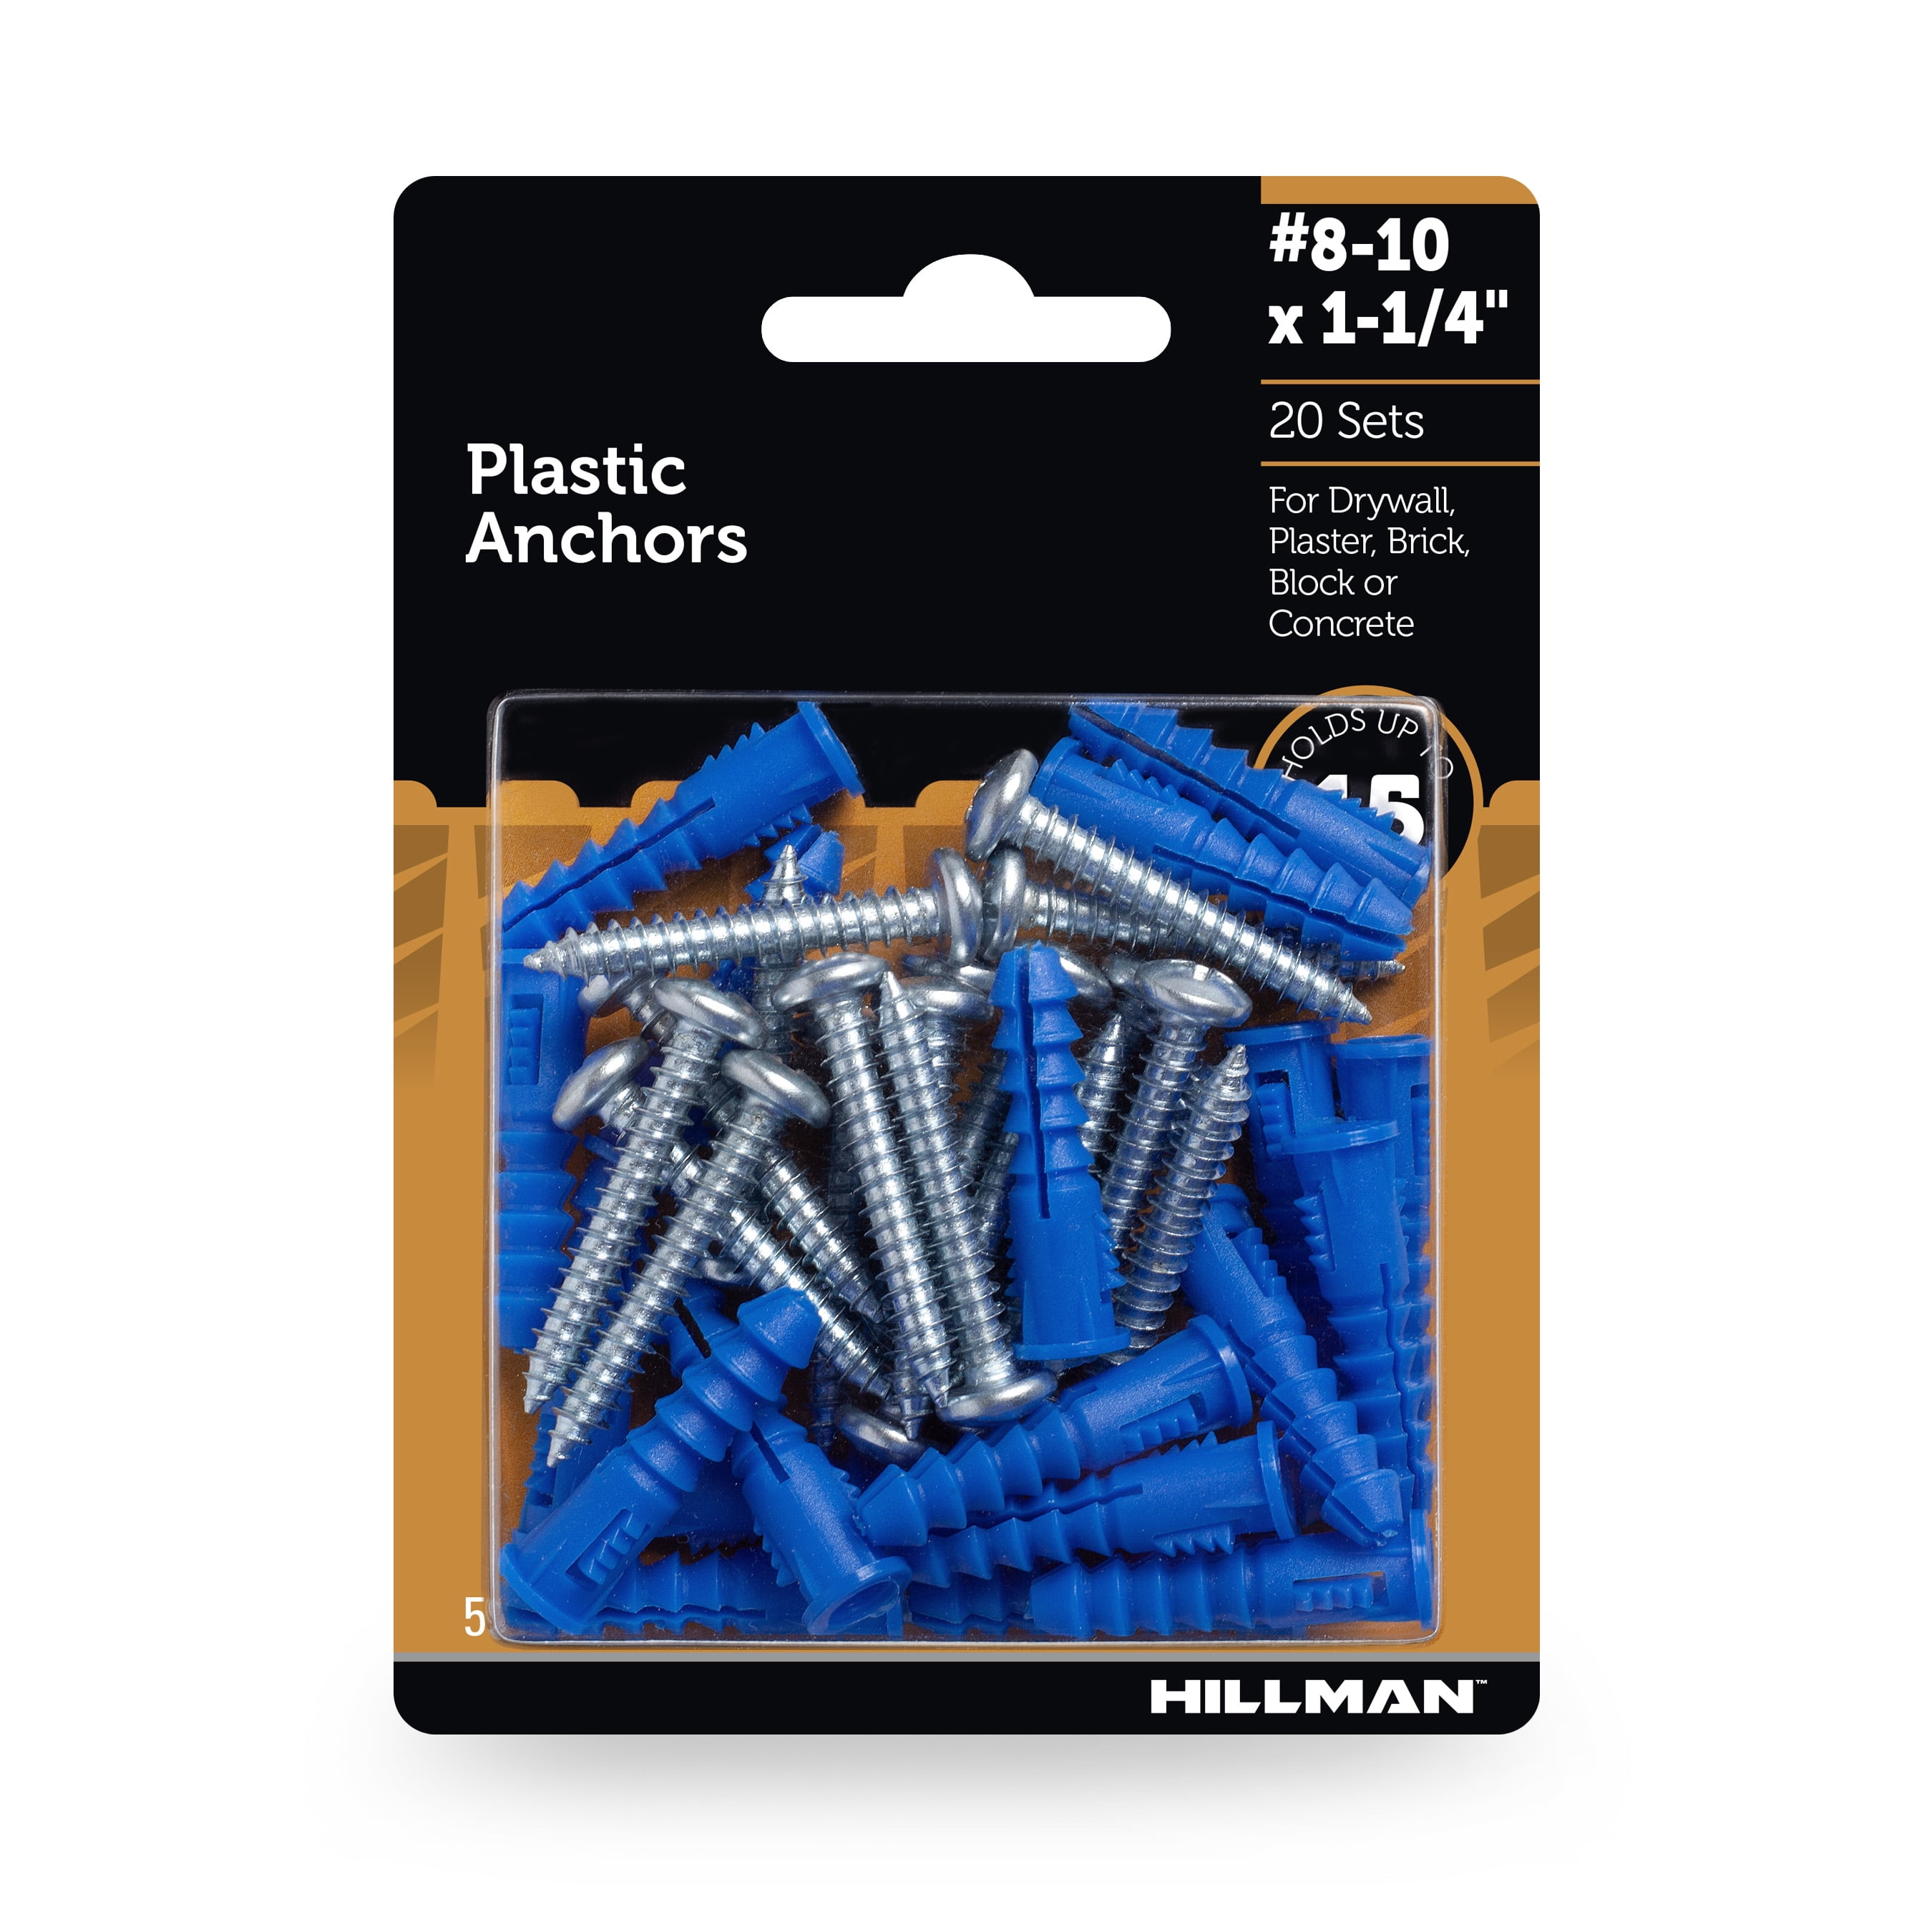 Hillman Plastic Anchors with Screws, #8-10 1.25", Holds up 15lbs, 20 Sets